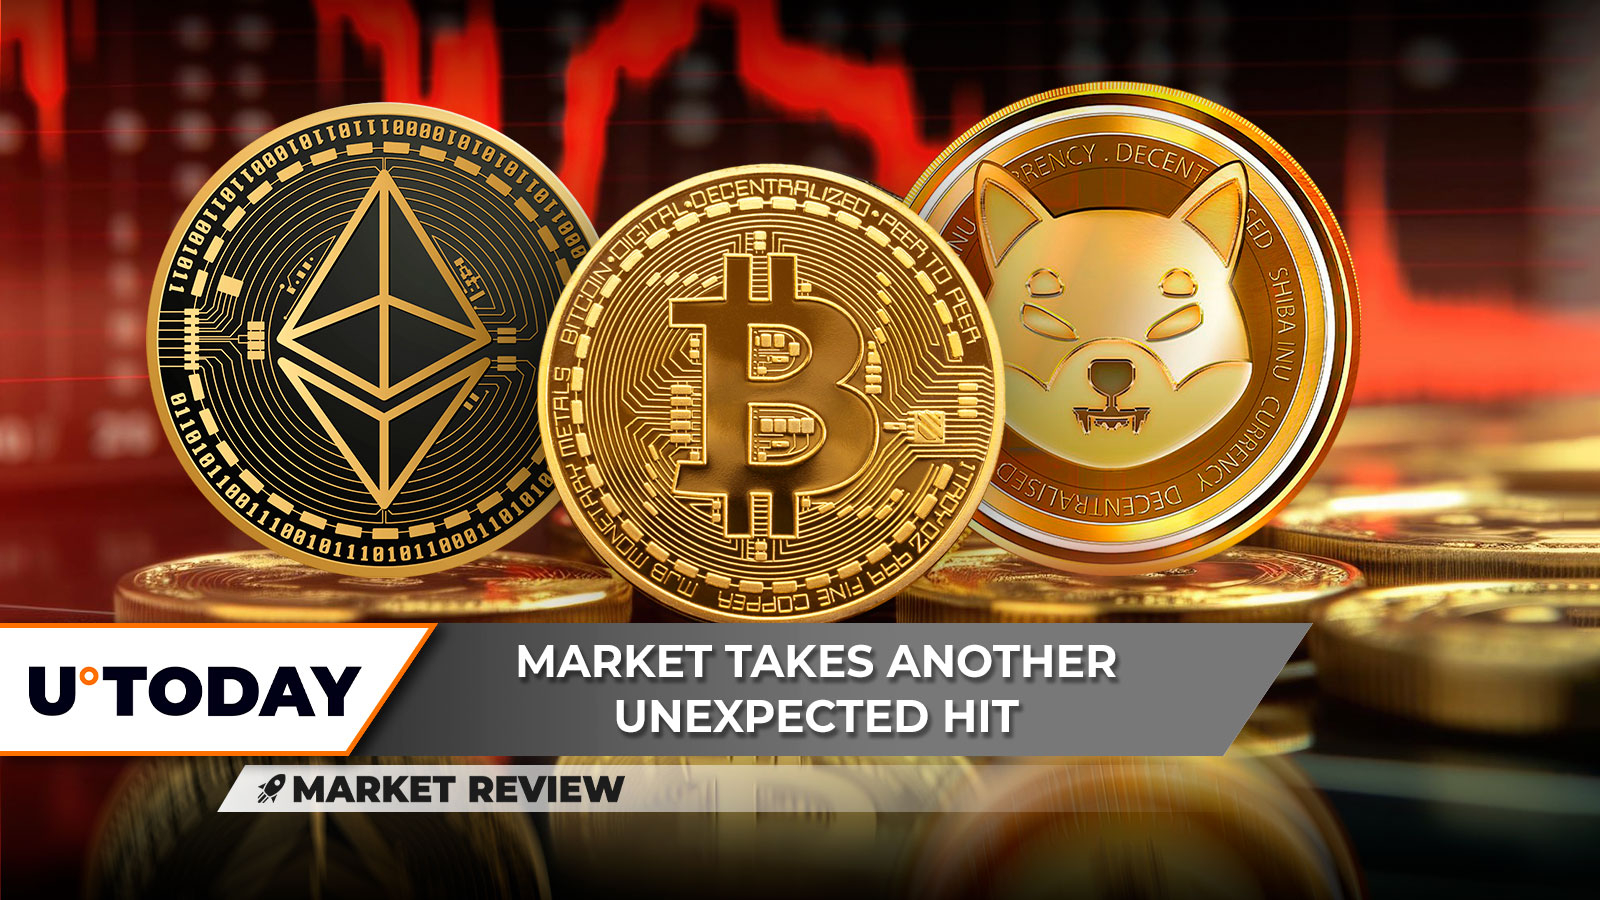 Bitcoin (BTC) About to Lose $40,000, Ethereum (ETH) in Dangerous Position, Shiba Inu (SHIB) at Local Support